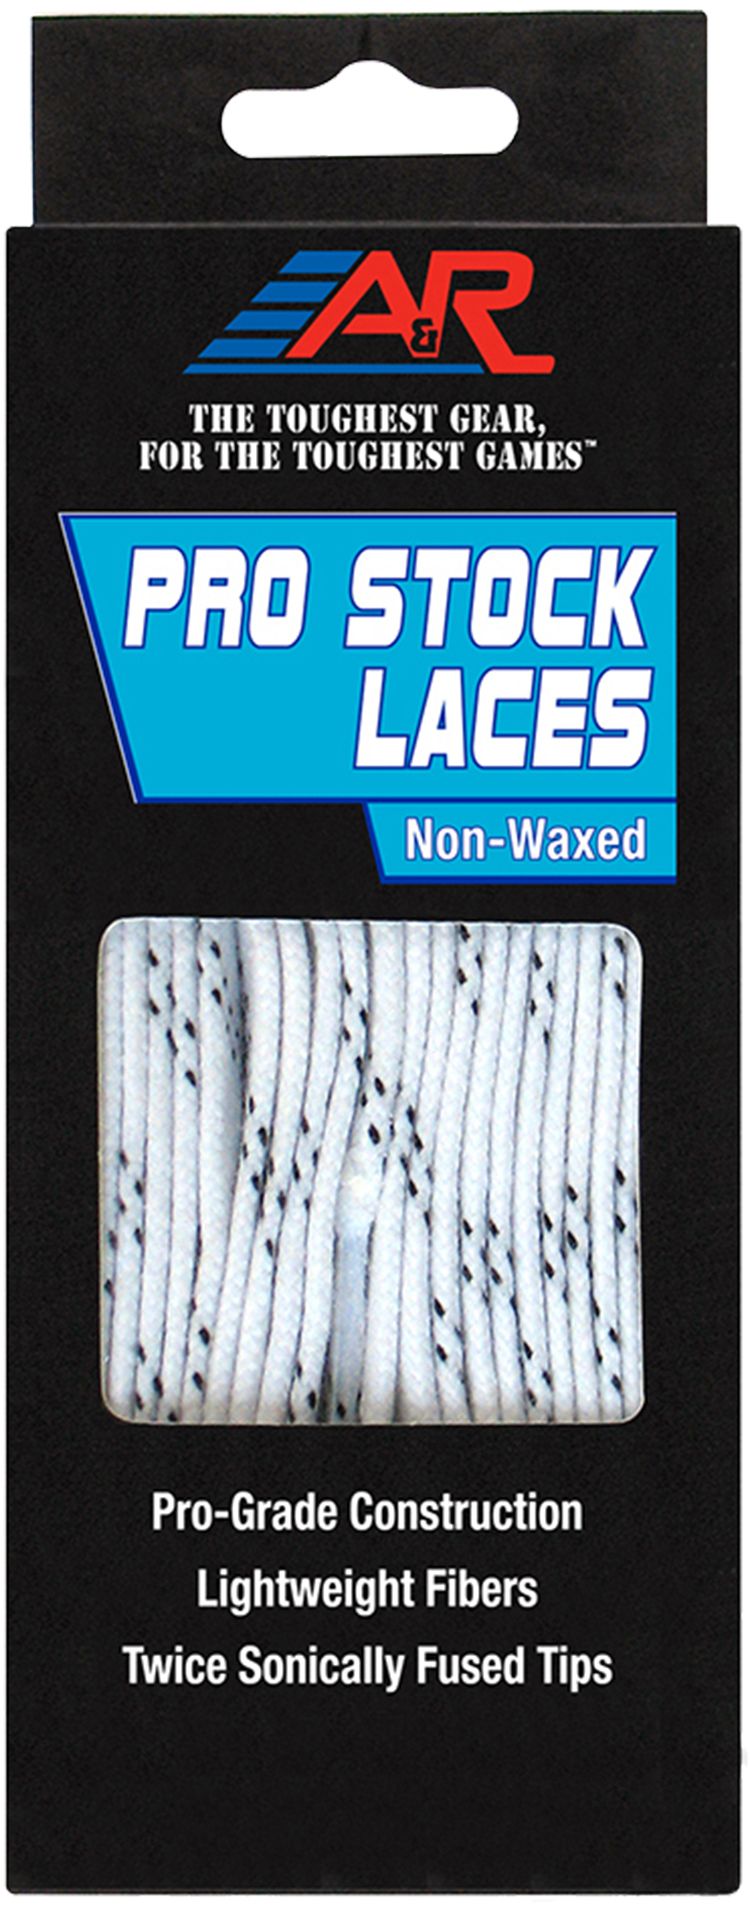 A&R Pro-Stock Non-Waxed Hockey Skate Laces